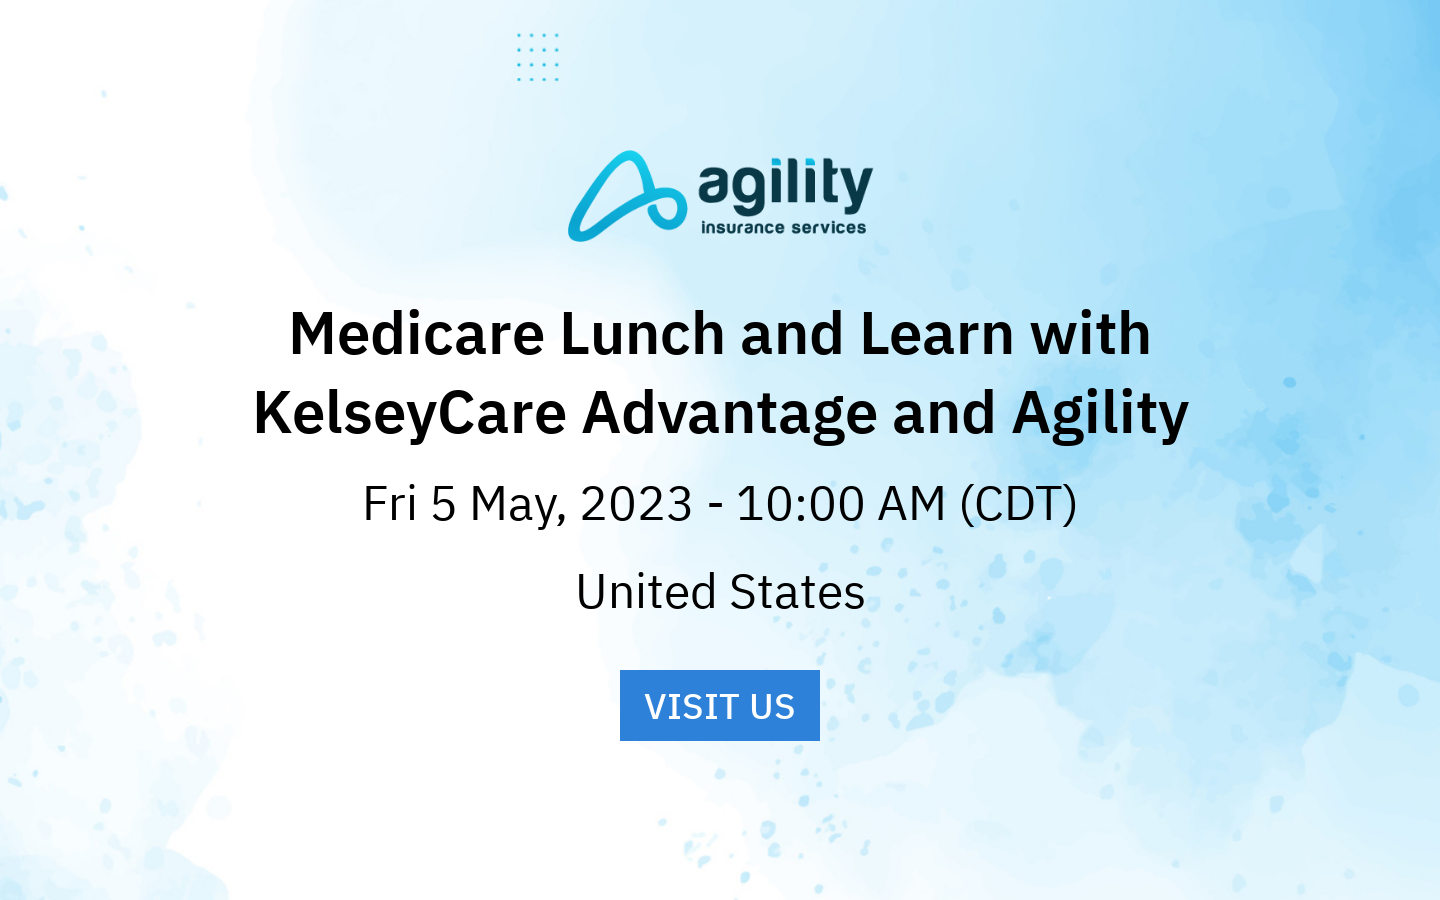 Medicare Lunch and Learn with KelseyCare Advantage and Agility